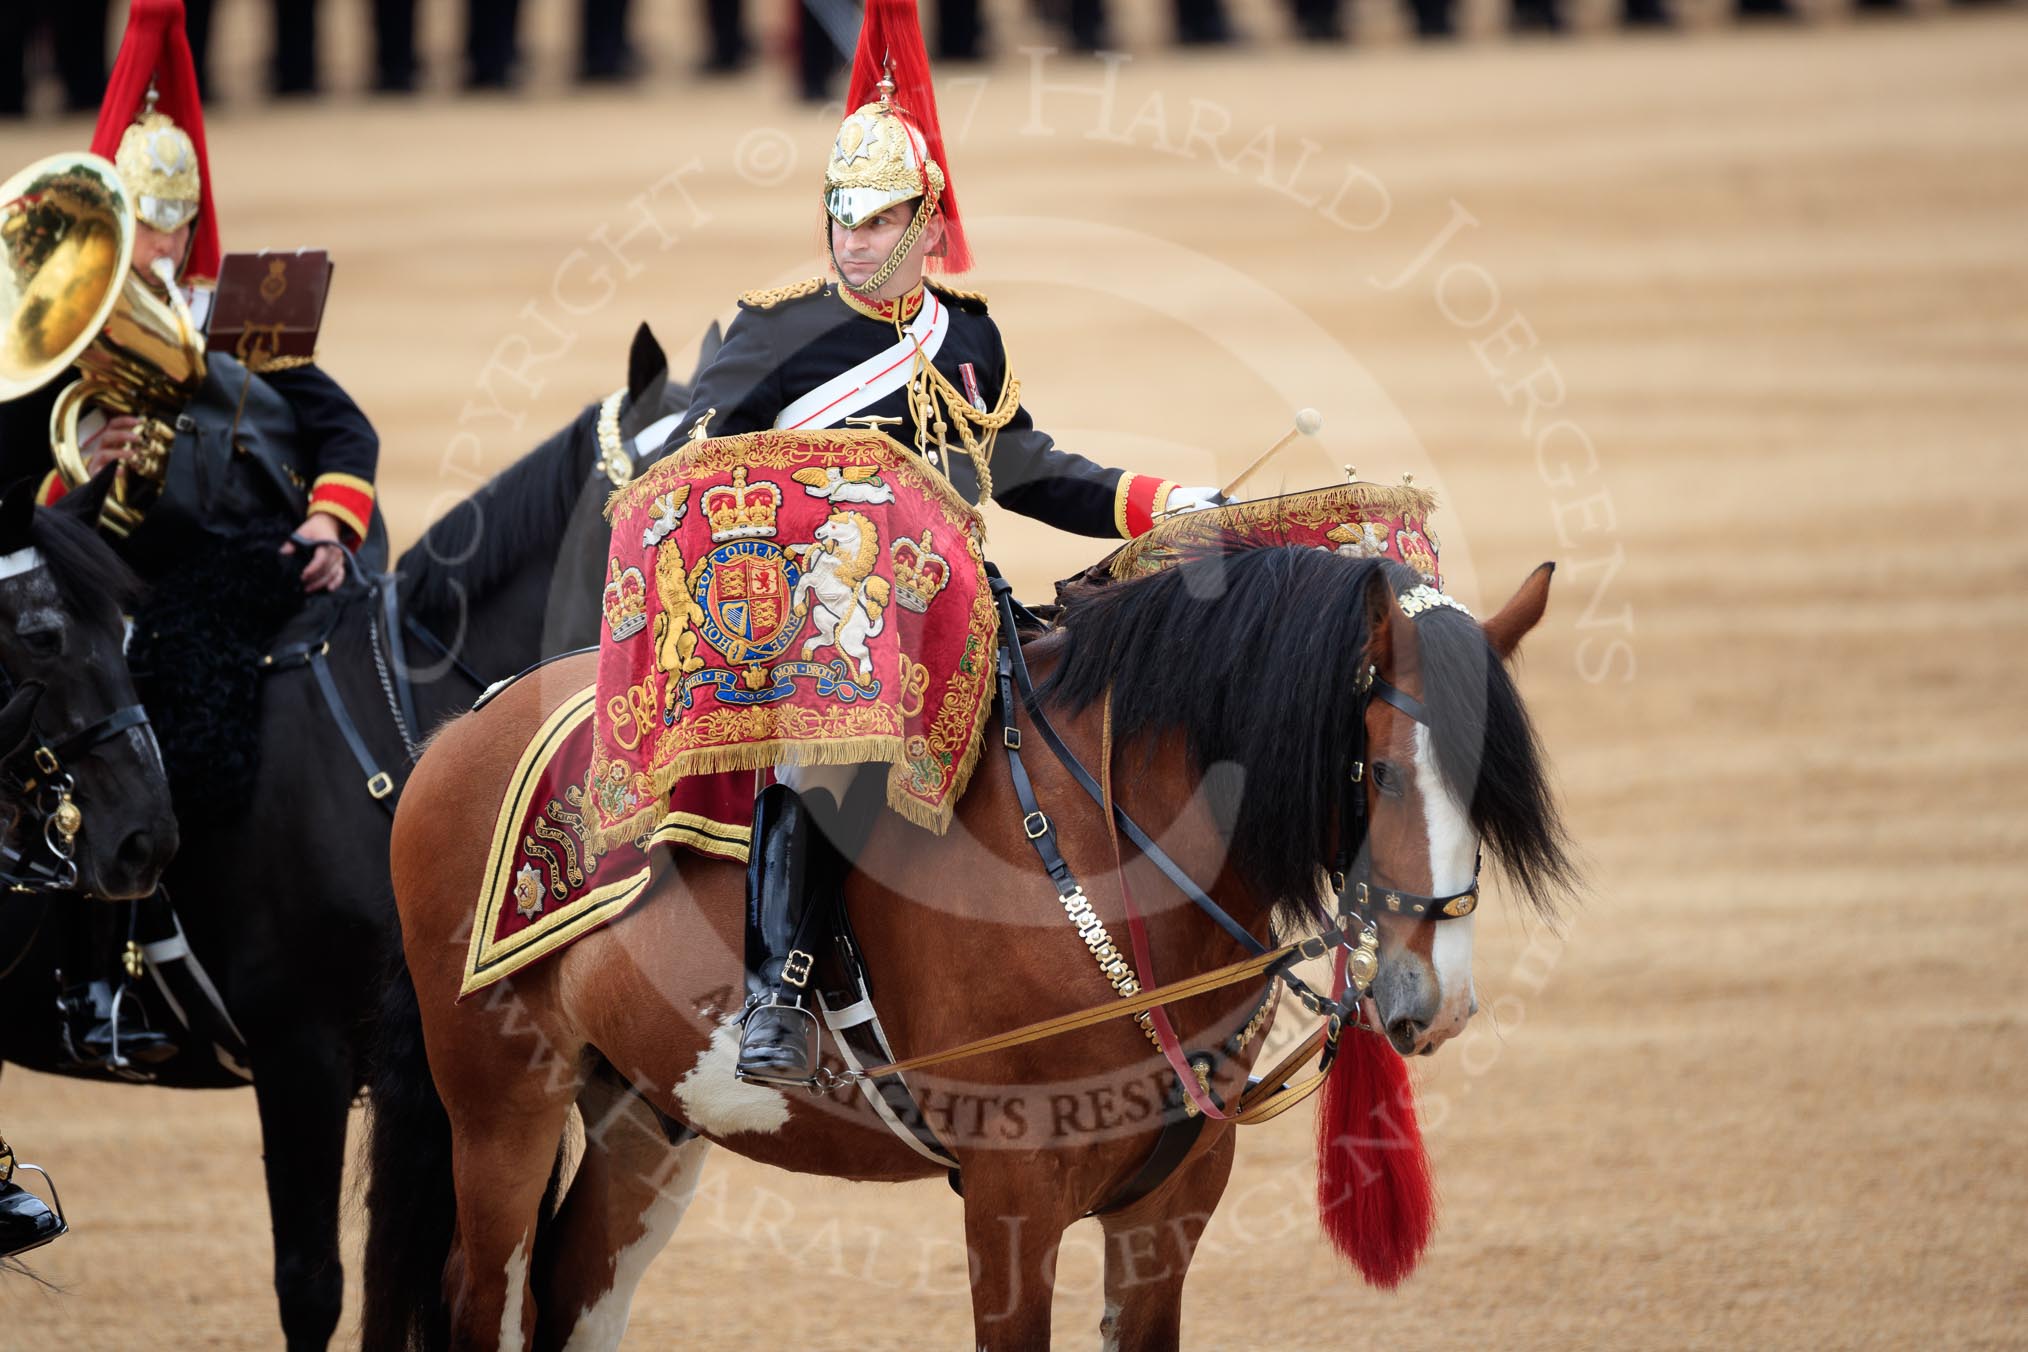 during The Colonel's Review {iptcyear4} (final rehearsal for Trooping the Colour, The Queen's Birthday Parade)  at Horse Guards Parade, Westminster, London, 2 June 2018, 12:03.